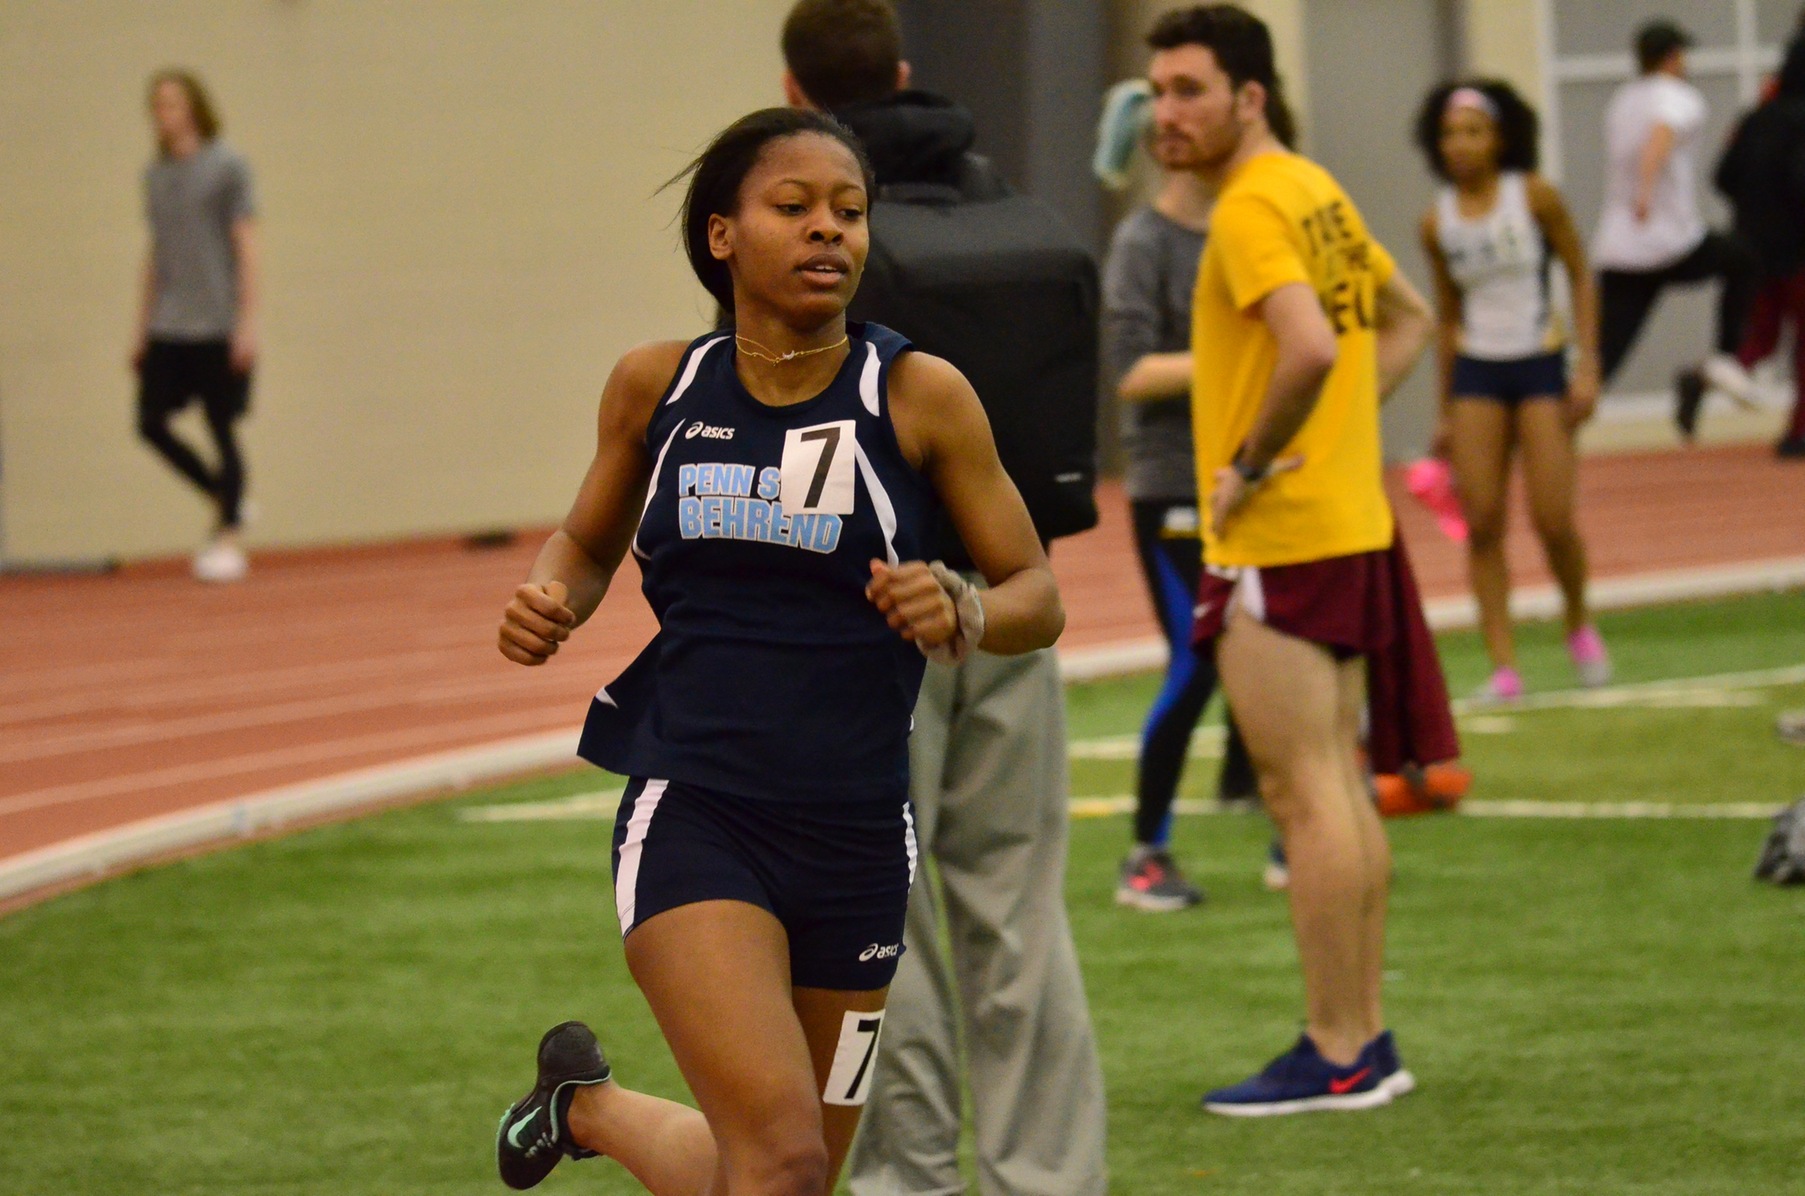 Lions Set to Compete at RIT Invite Saturday